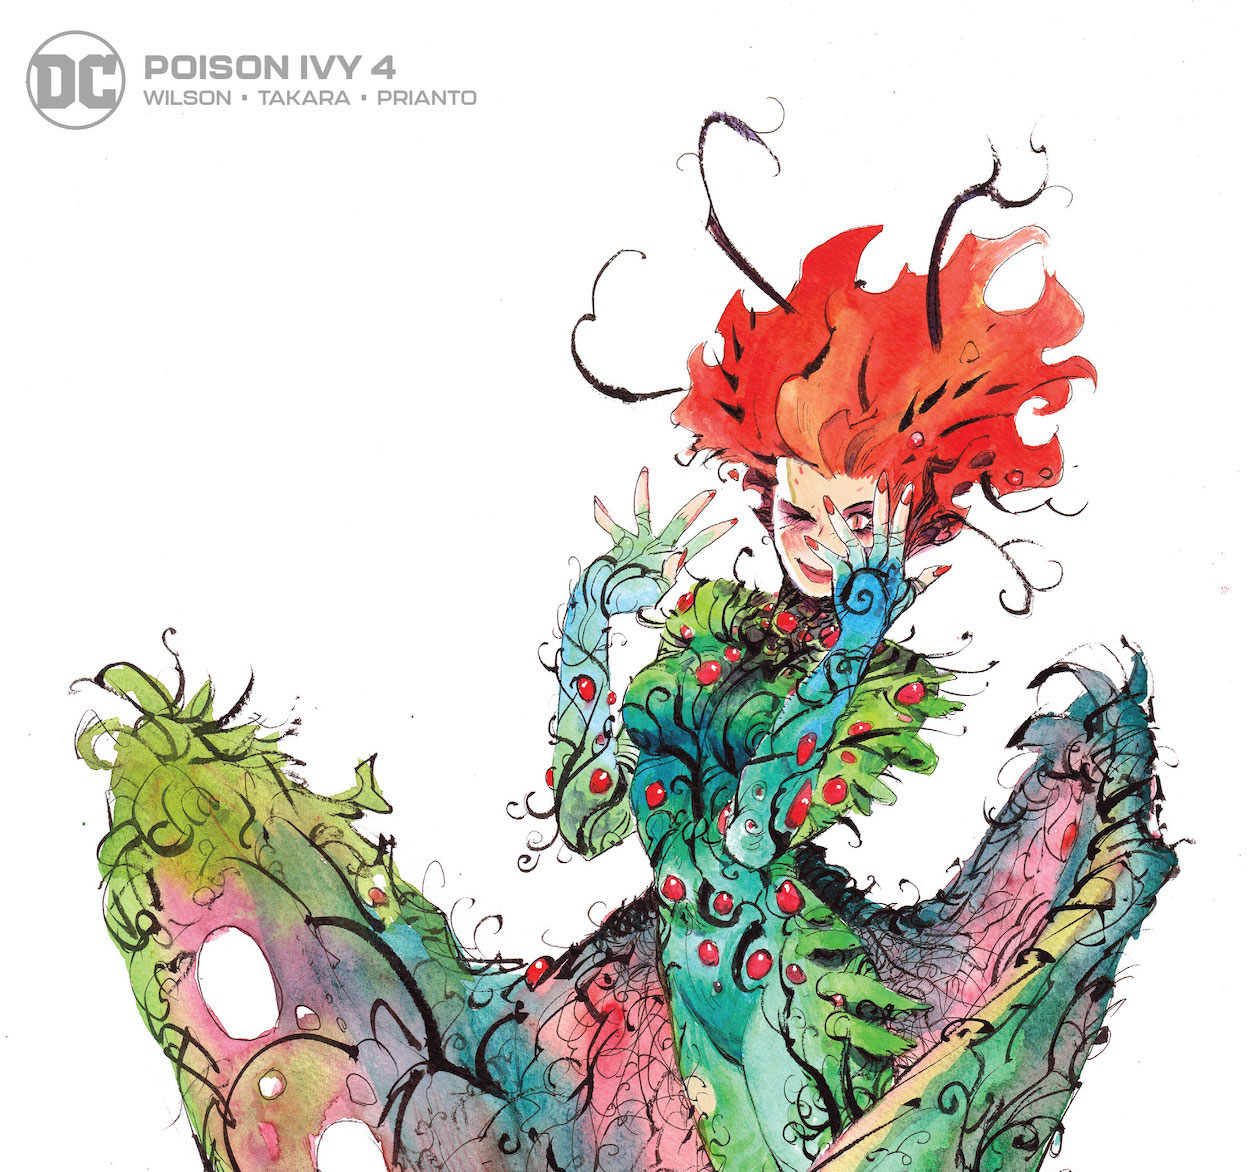 'Poison Ivy' #4 is dark, romantic, and beautiful